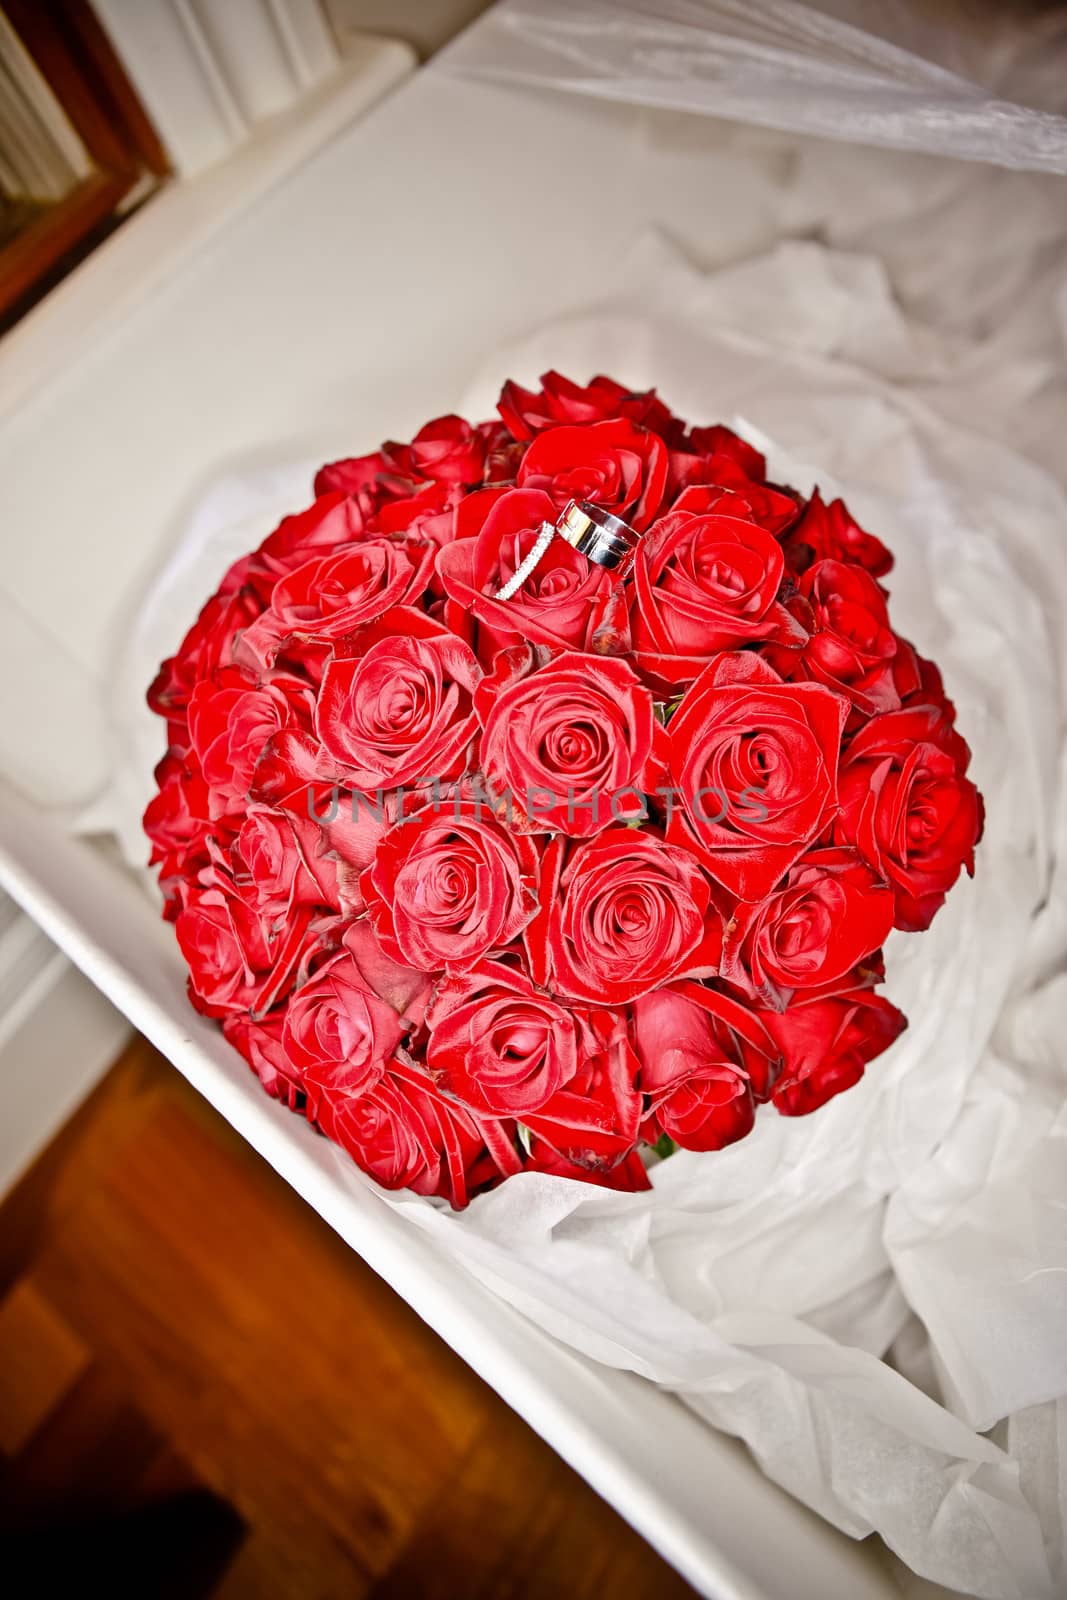 Wedding rings resting on a bridal bouquet of fresh red roses nestling in tissue paper in a box